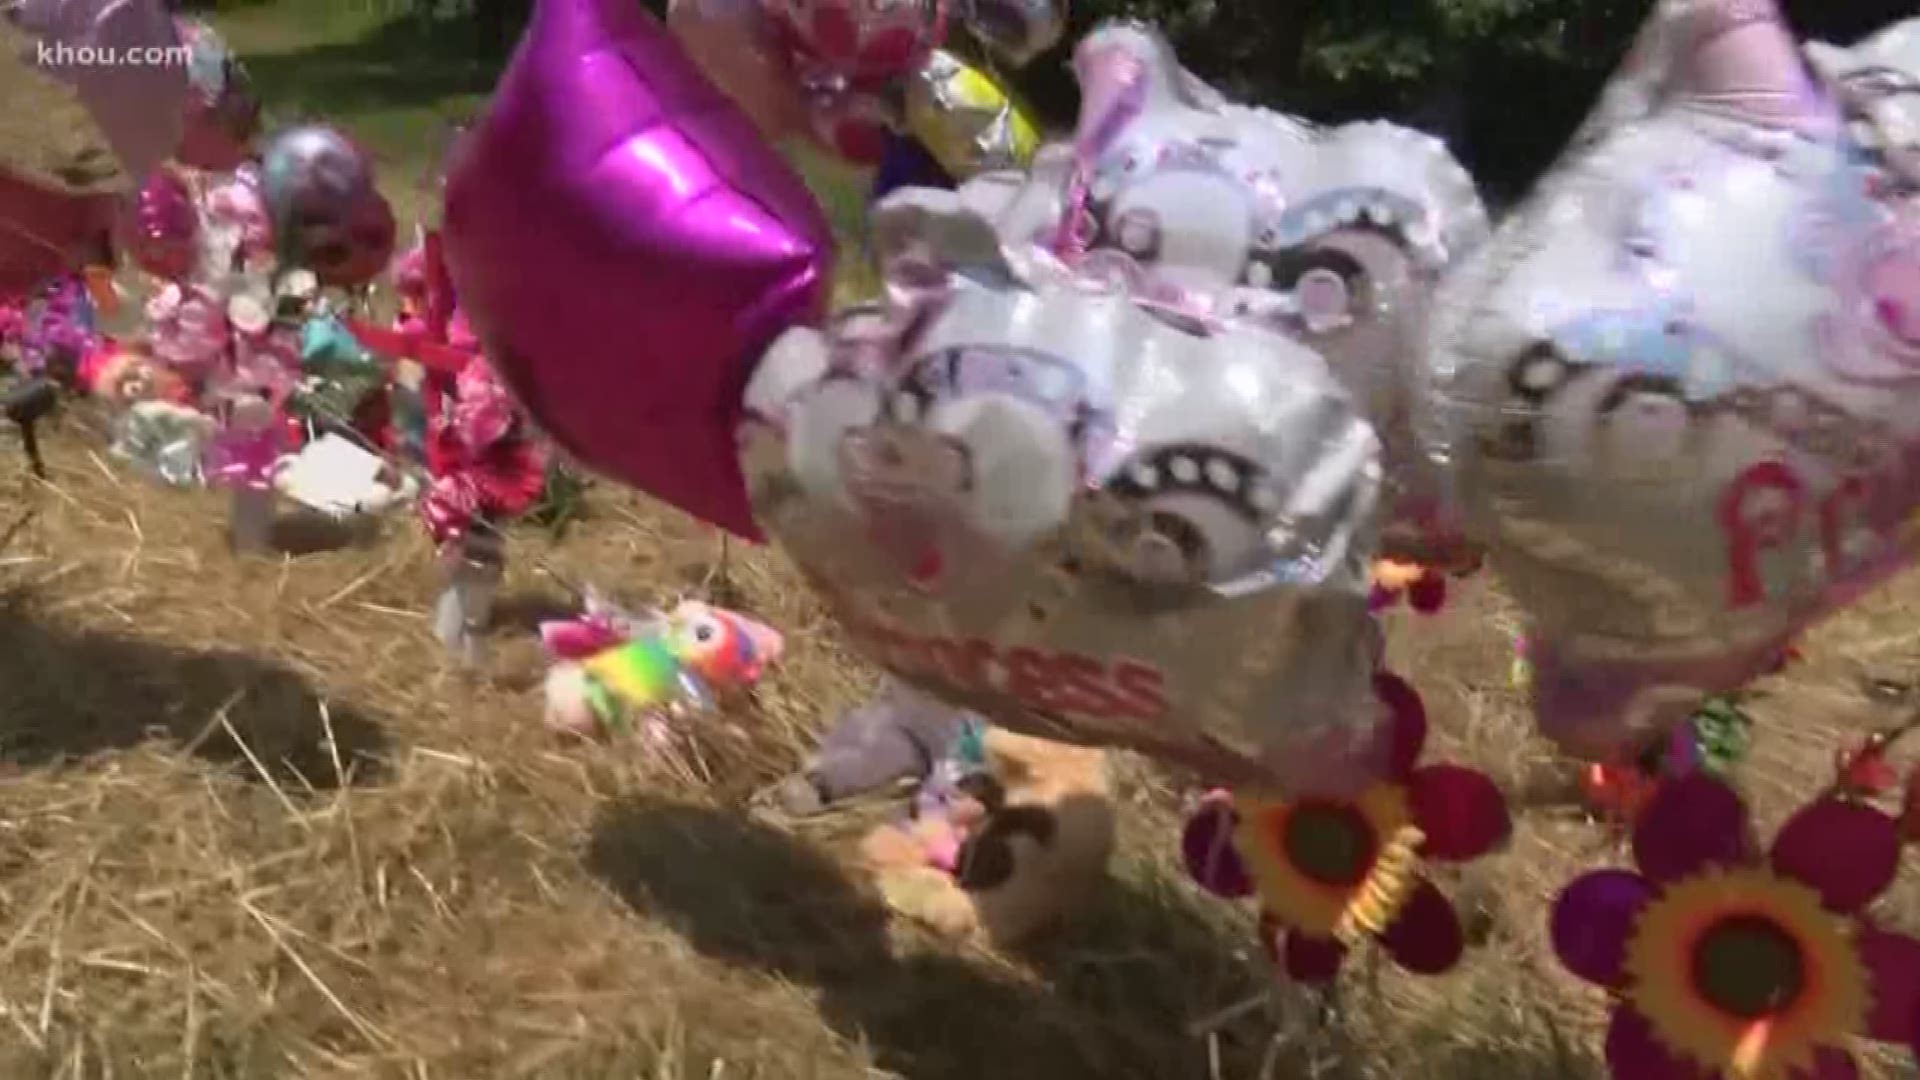 Maleah Davis' remains were found in Arkansas last week, and more charges could be filed related to her death.